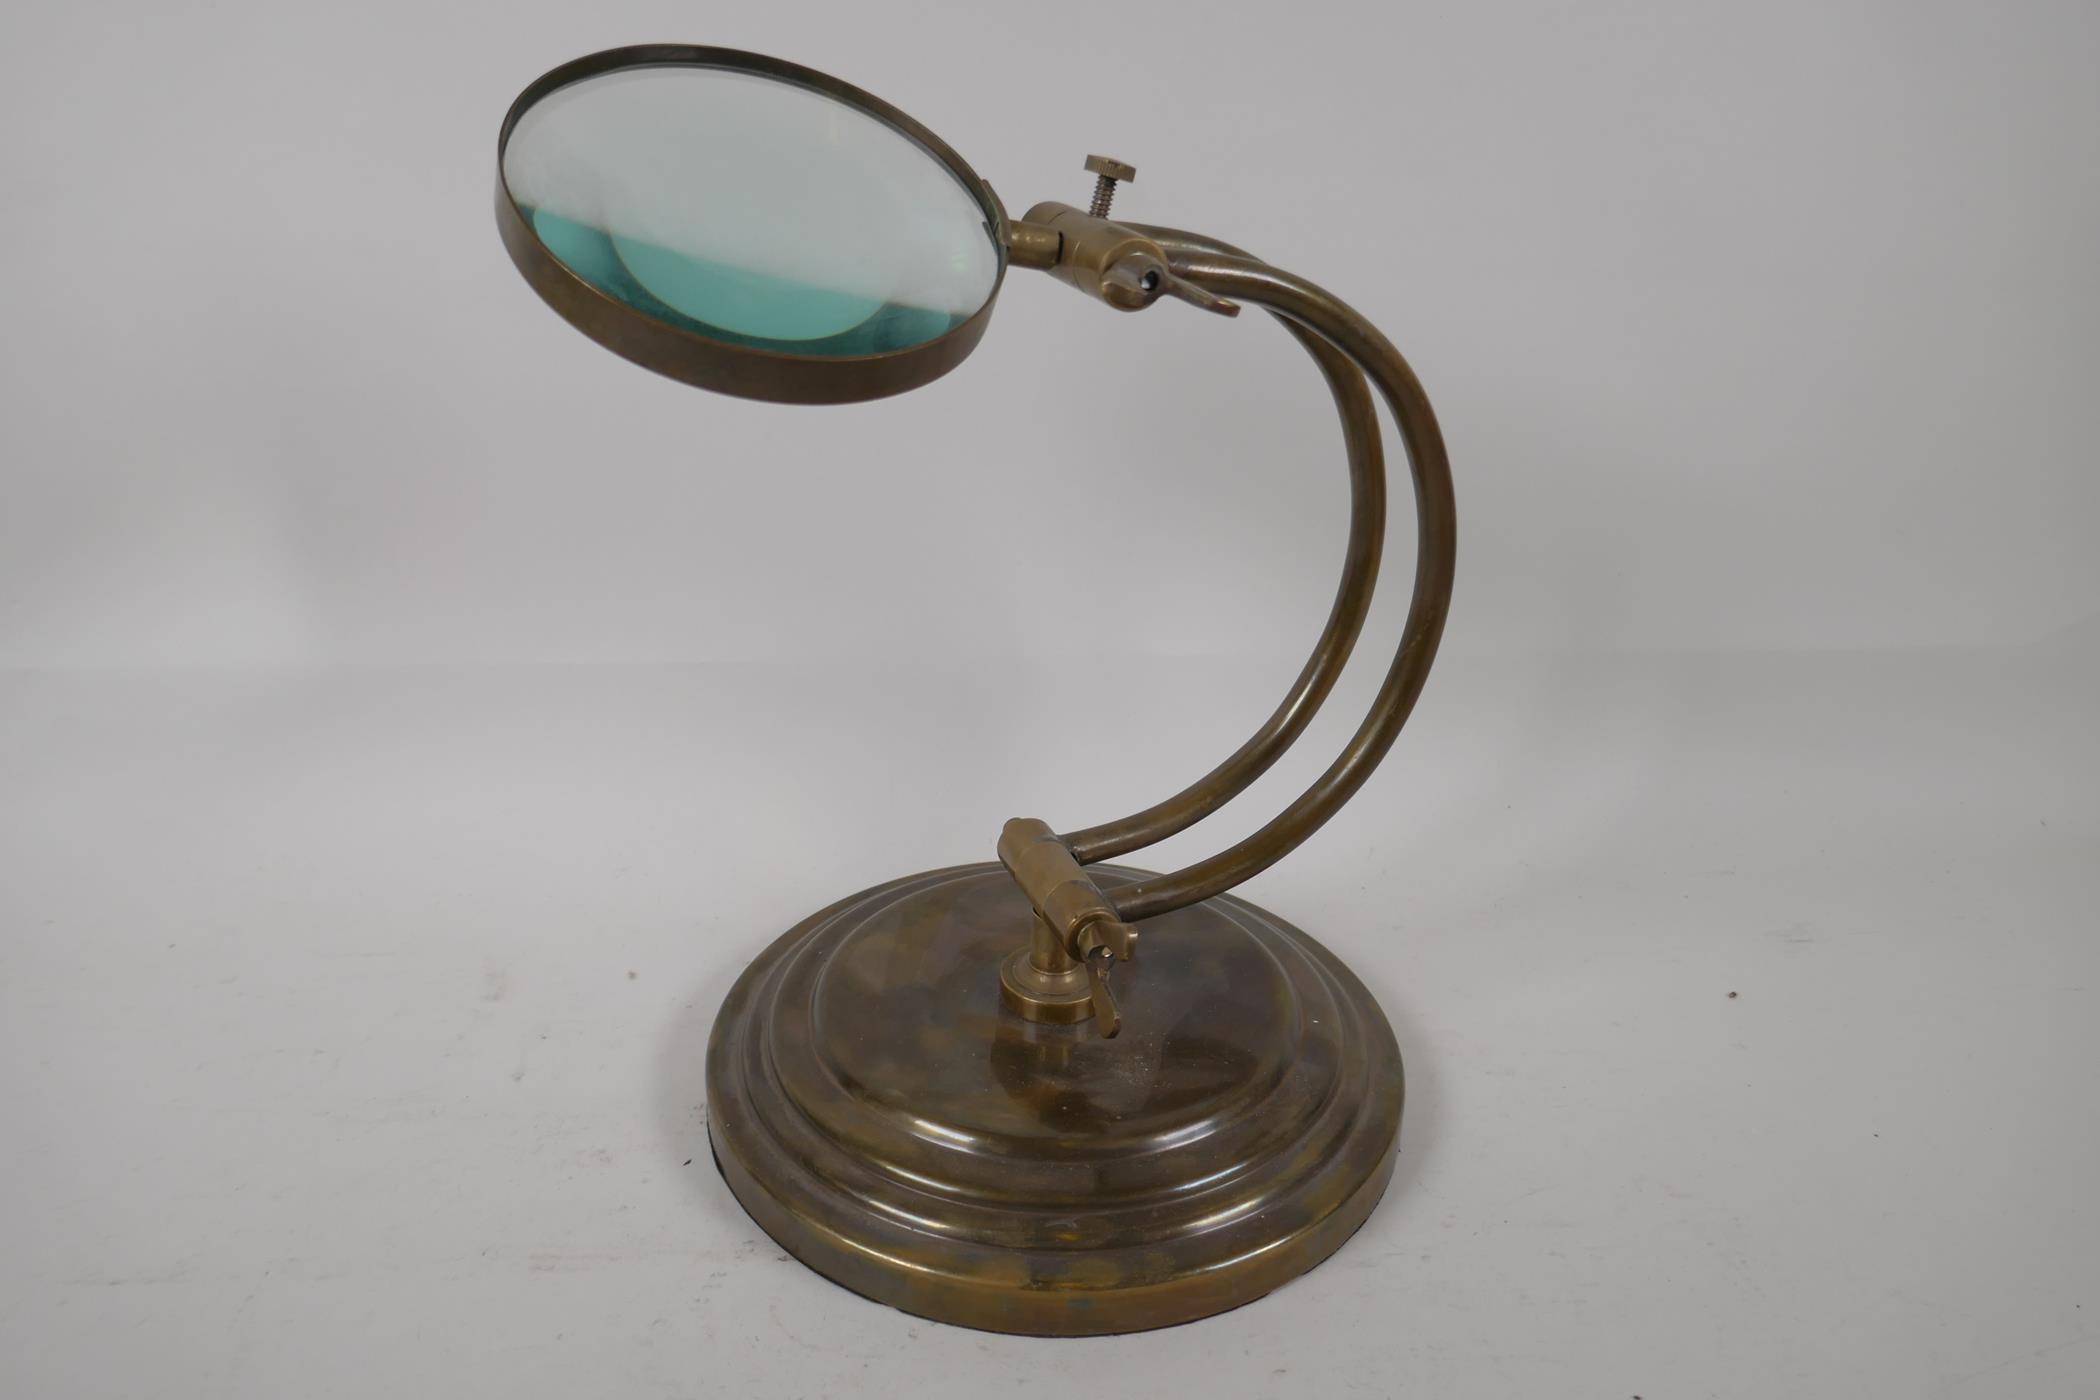 A brass desk top magnifying glass on adjustable stand, 10" high